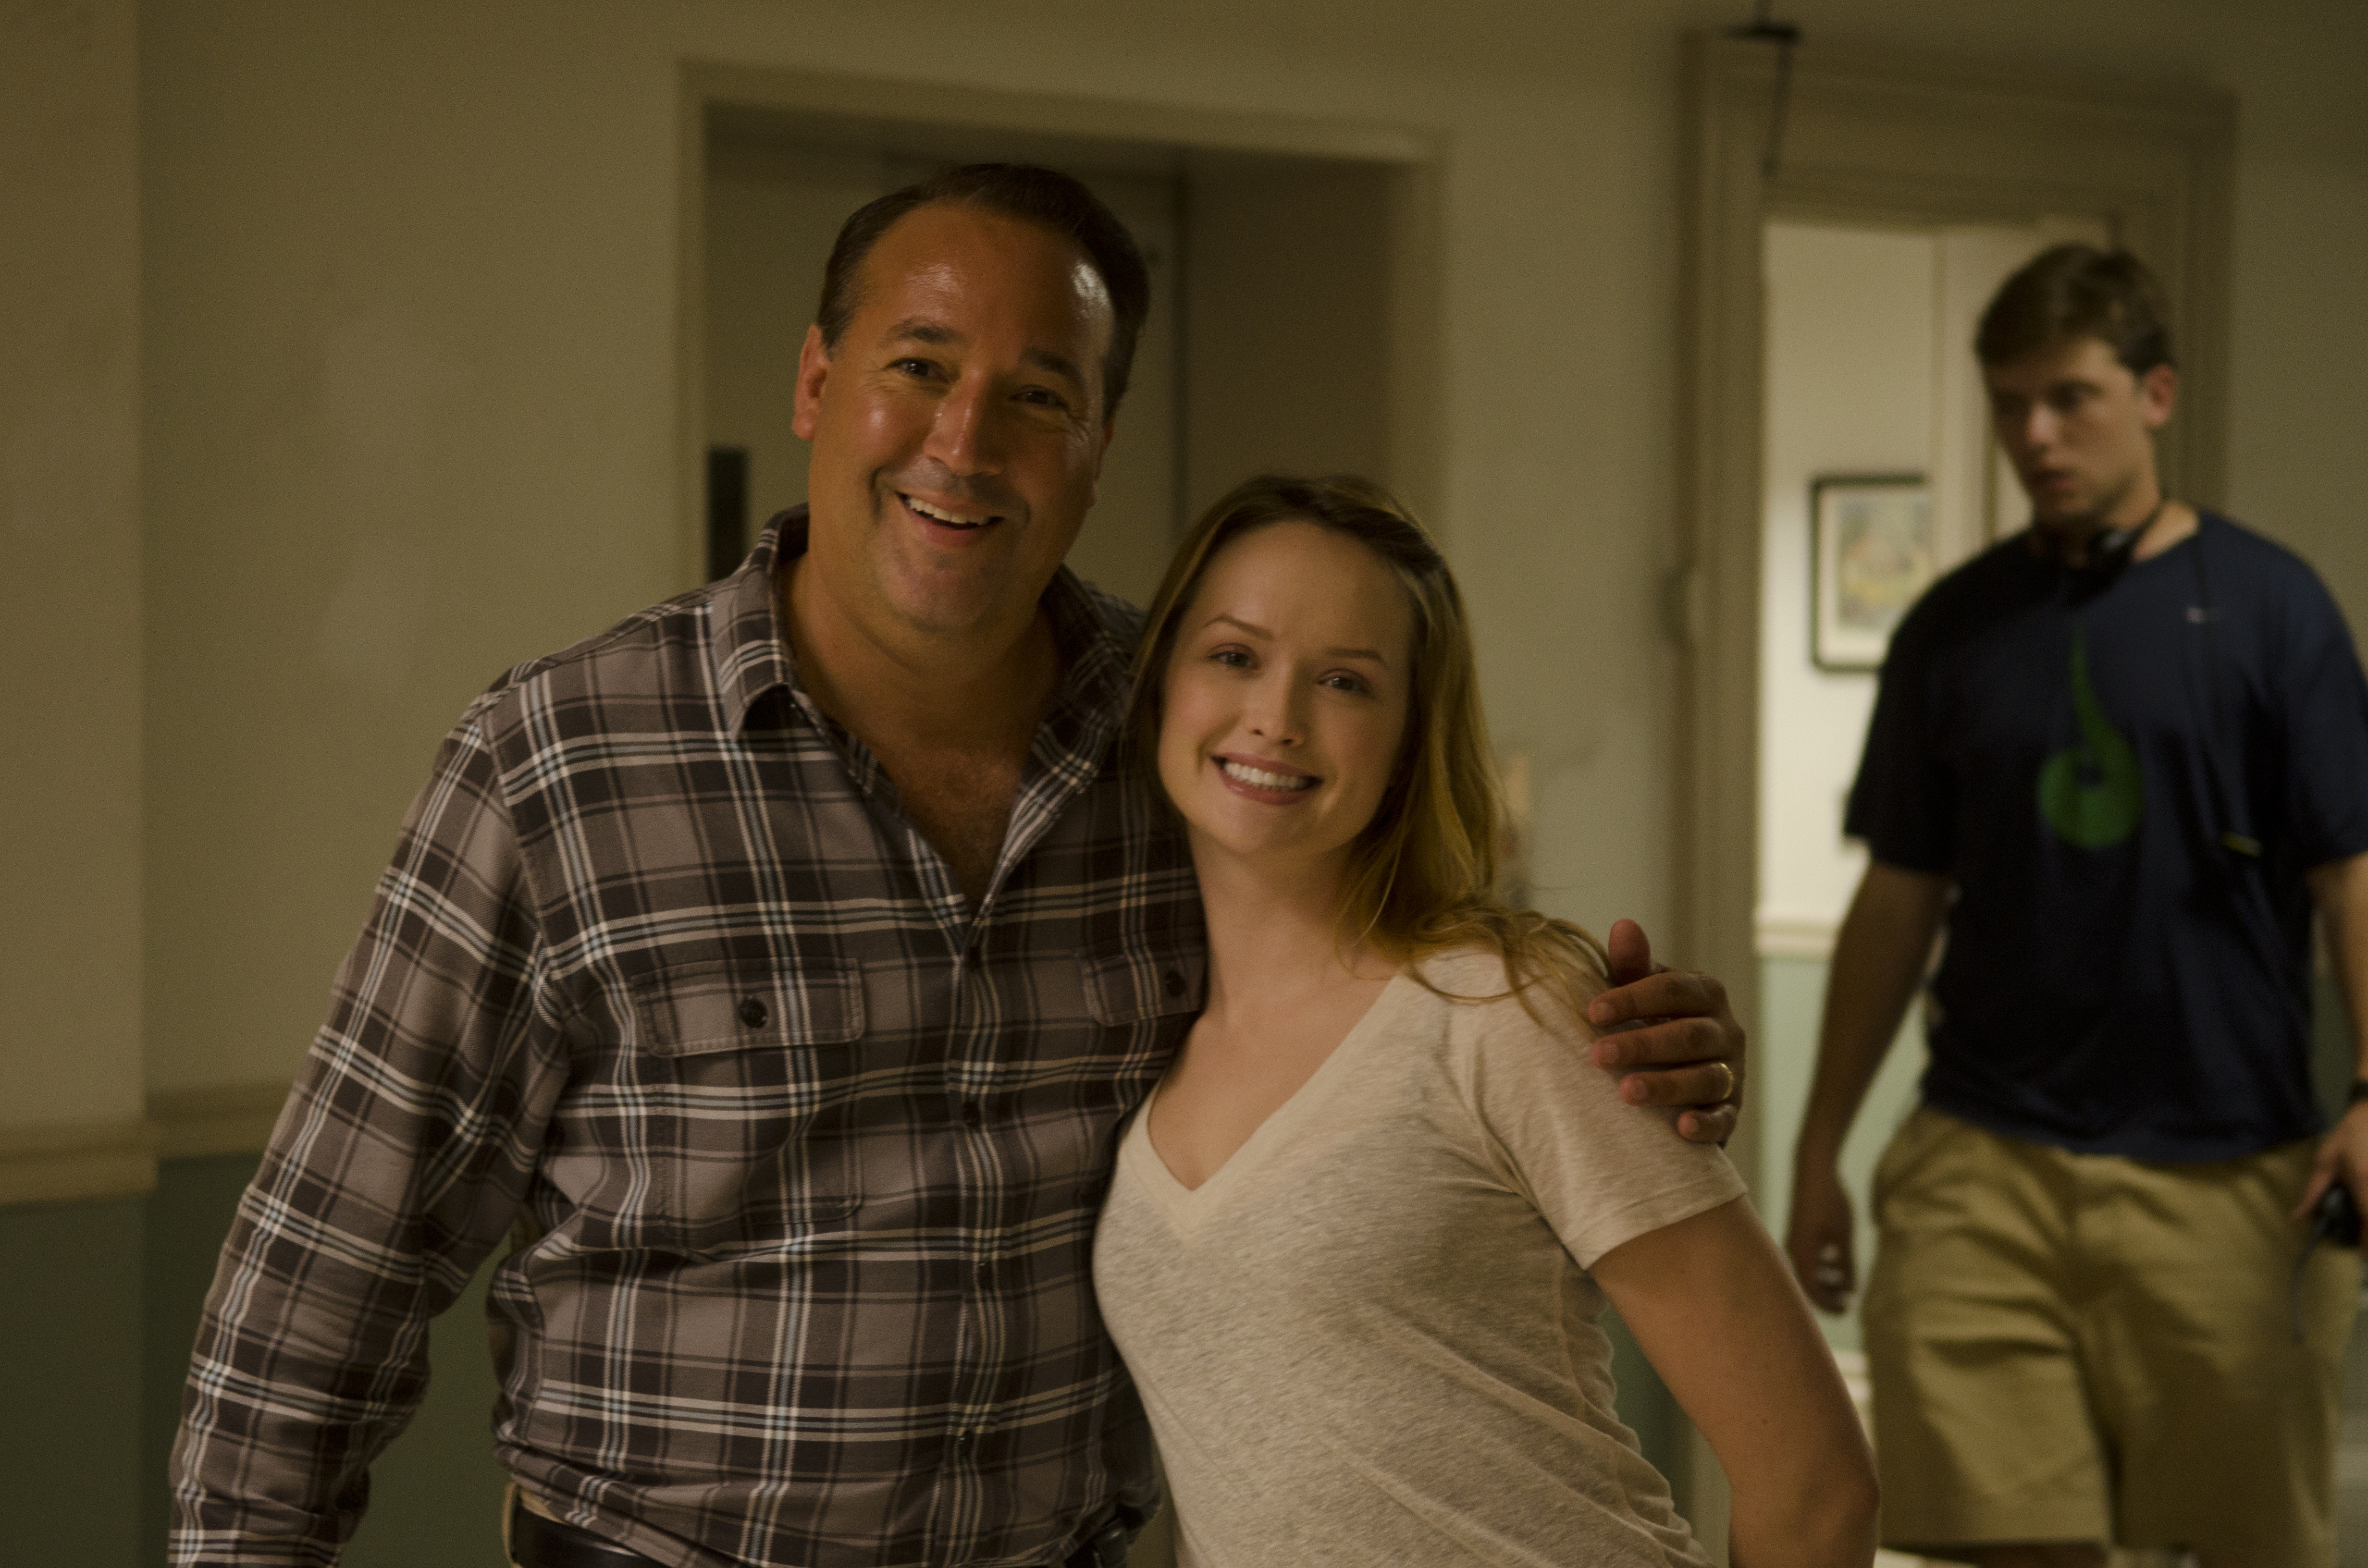 Kaylee DeFer (Actress - Gossip Girl) and Ron Stein (Producer) on set of her new film DARKROOM